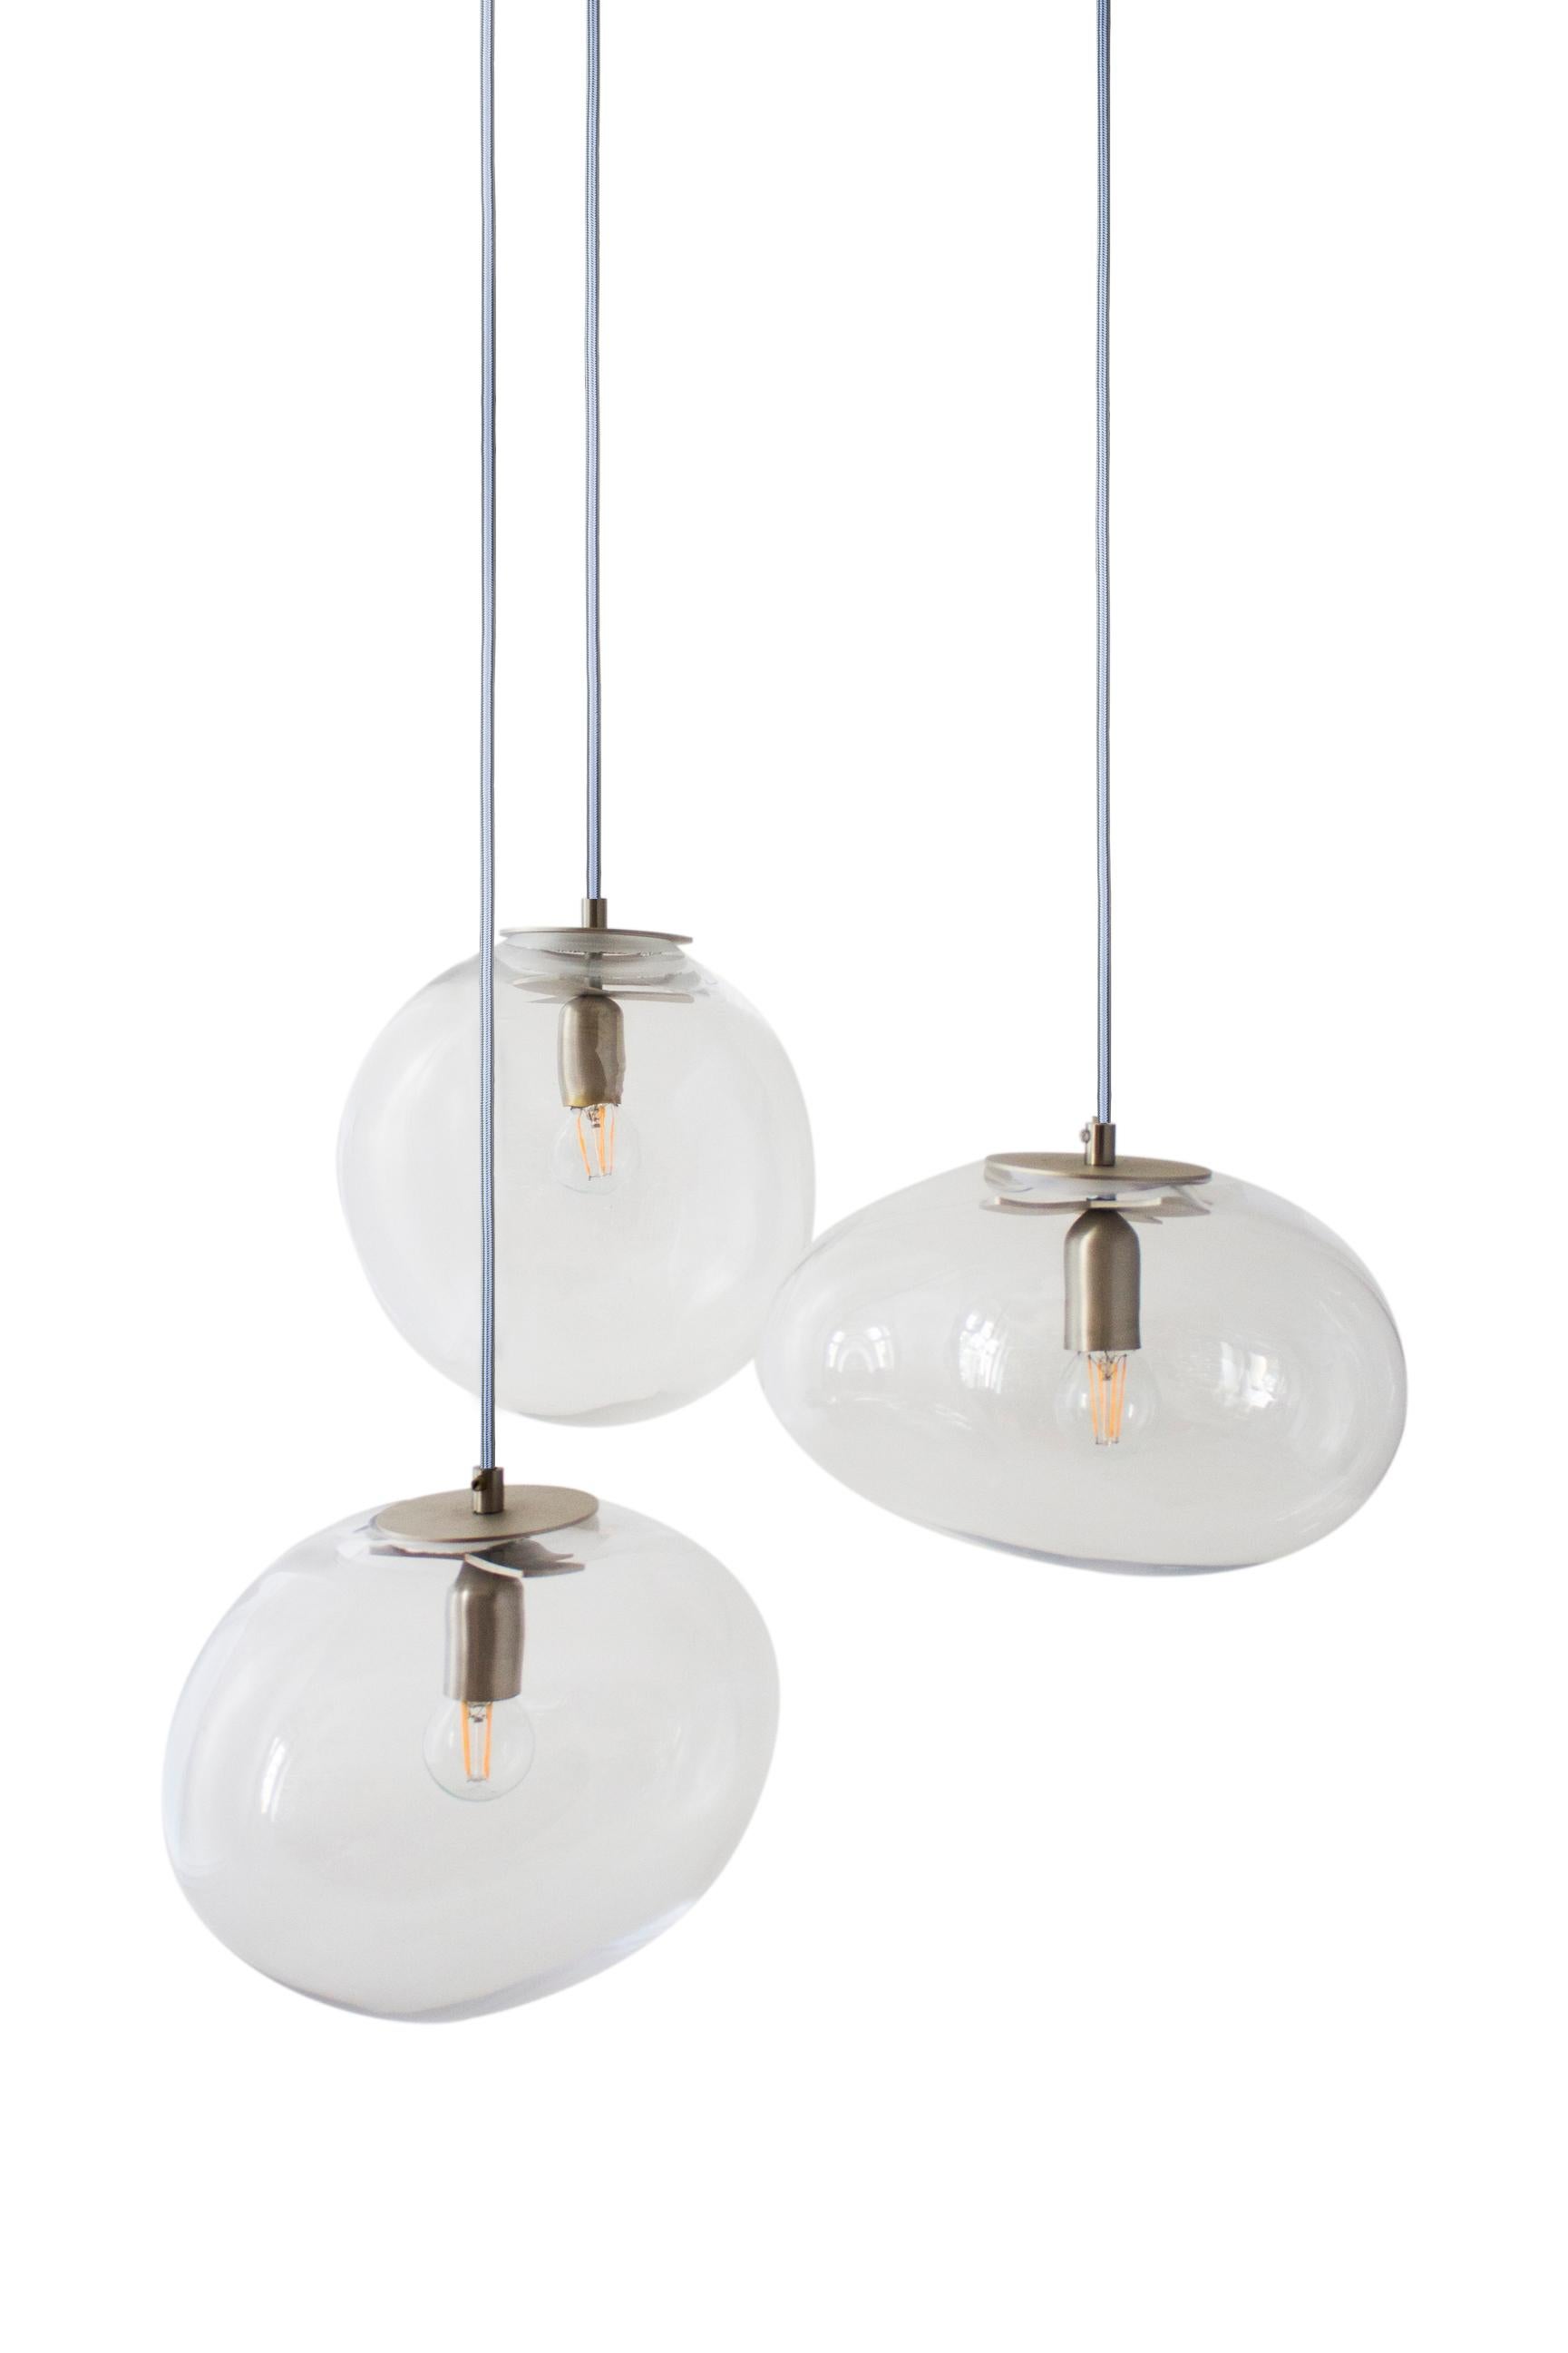 Set of 3 Planetoide Juno crystal pendants by Eloa.
No UL listed 
Material: glass, steel, silver, LED bulb
Dimensions: D30 x W30 x H250 cm
Also available in different colours and dimensions.

All our lamps can be wired according to each country. If